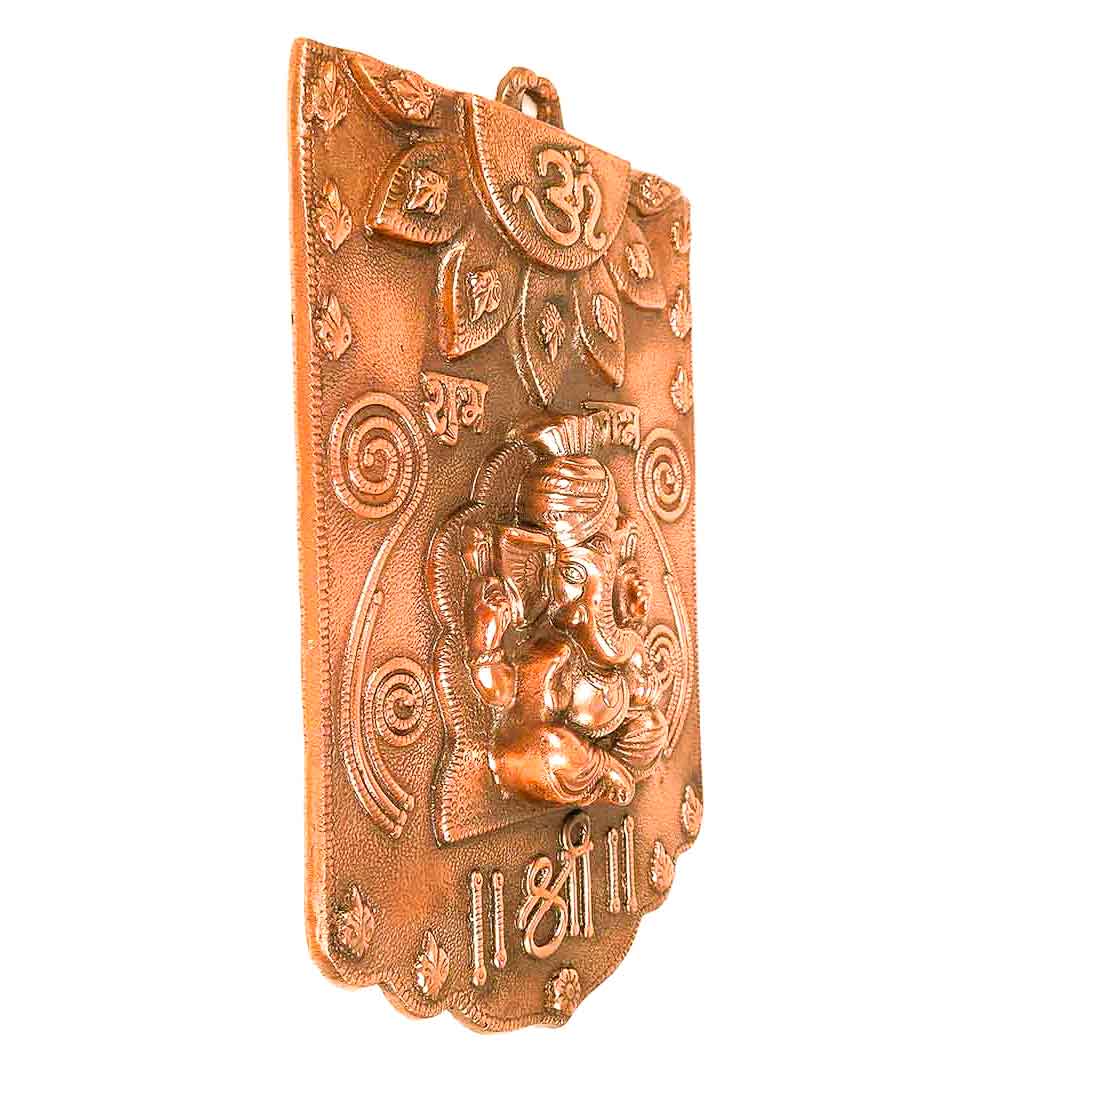 Ganesh Wall Hanging Murti | Ganesha With Om And Shubh Labh Wall Idol Decor - for Entrance Door | Ganesha Statue Hangings - for Home, Puja, Temple, Religious Decor & Gift - 14 Inch